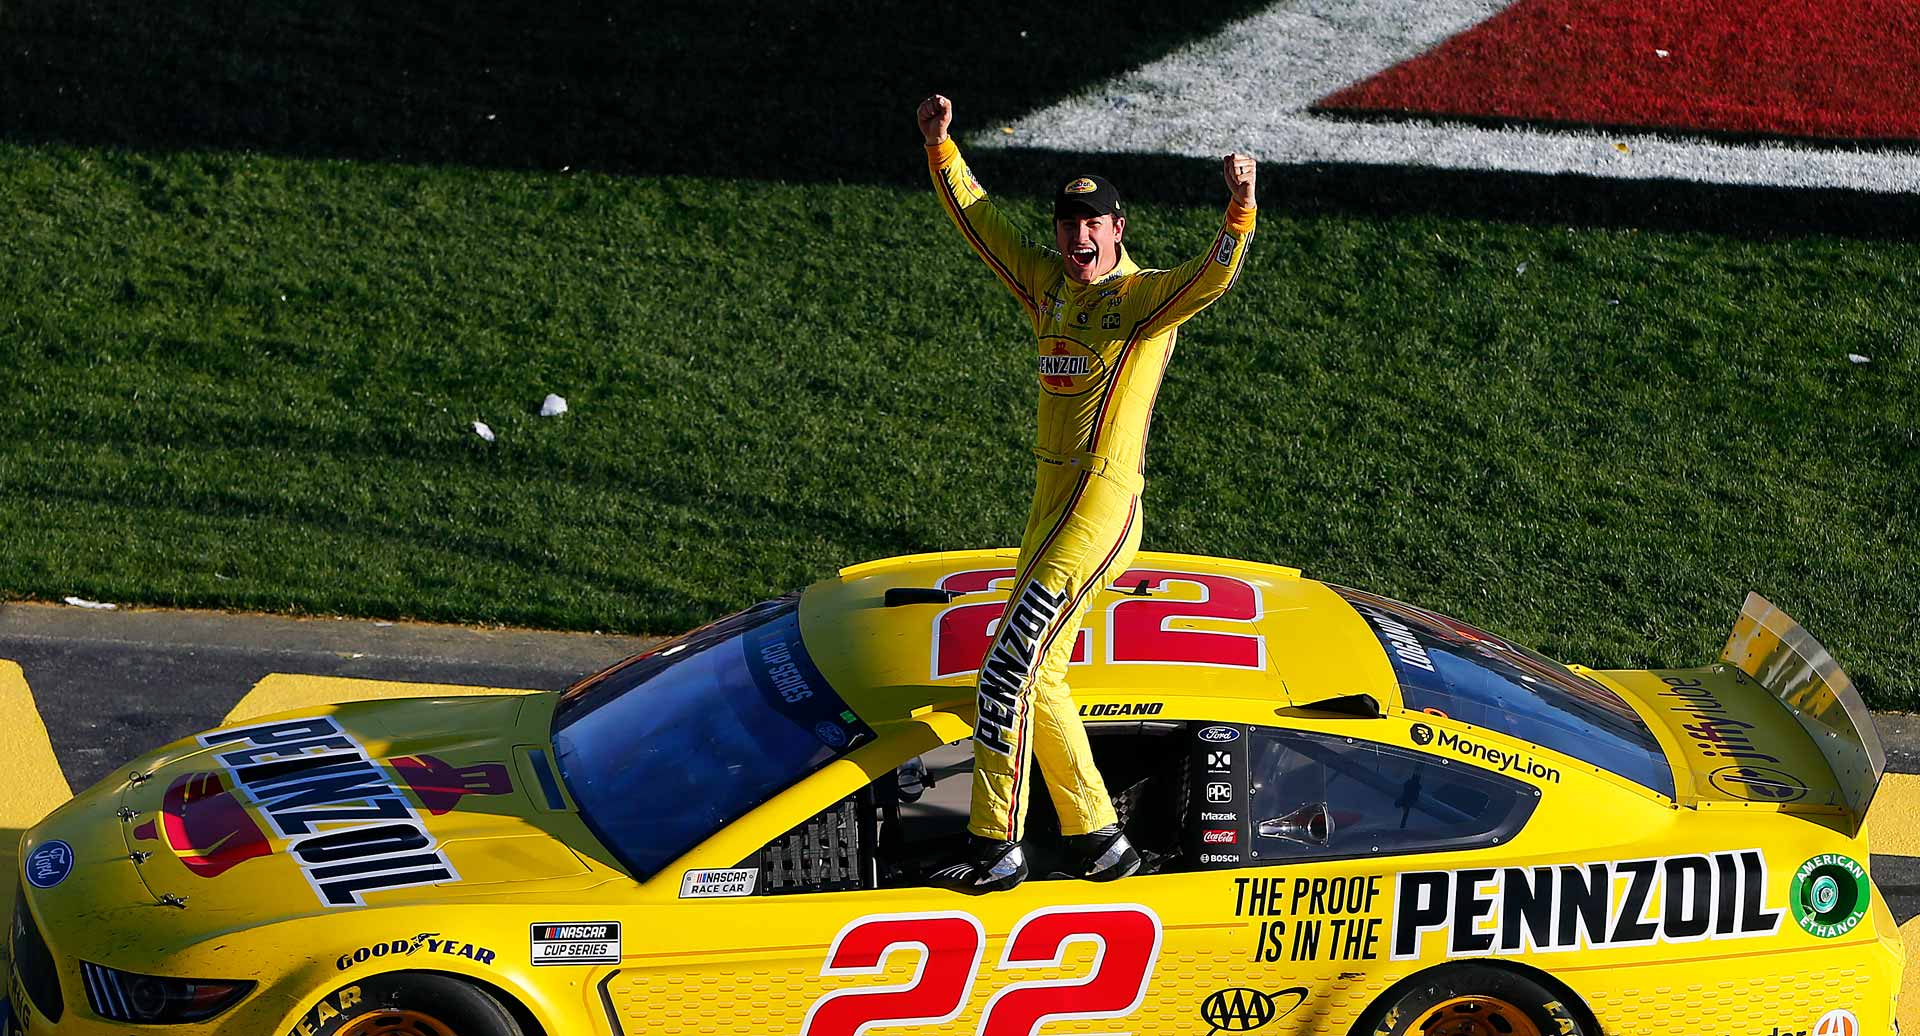 Joey Logano Gambles on Old Tires and Wins Pennzoil 400 